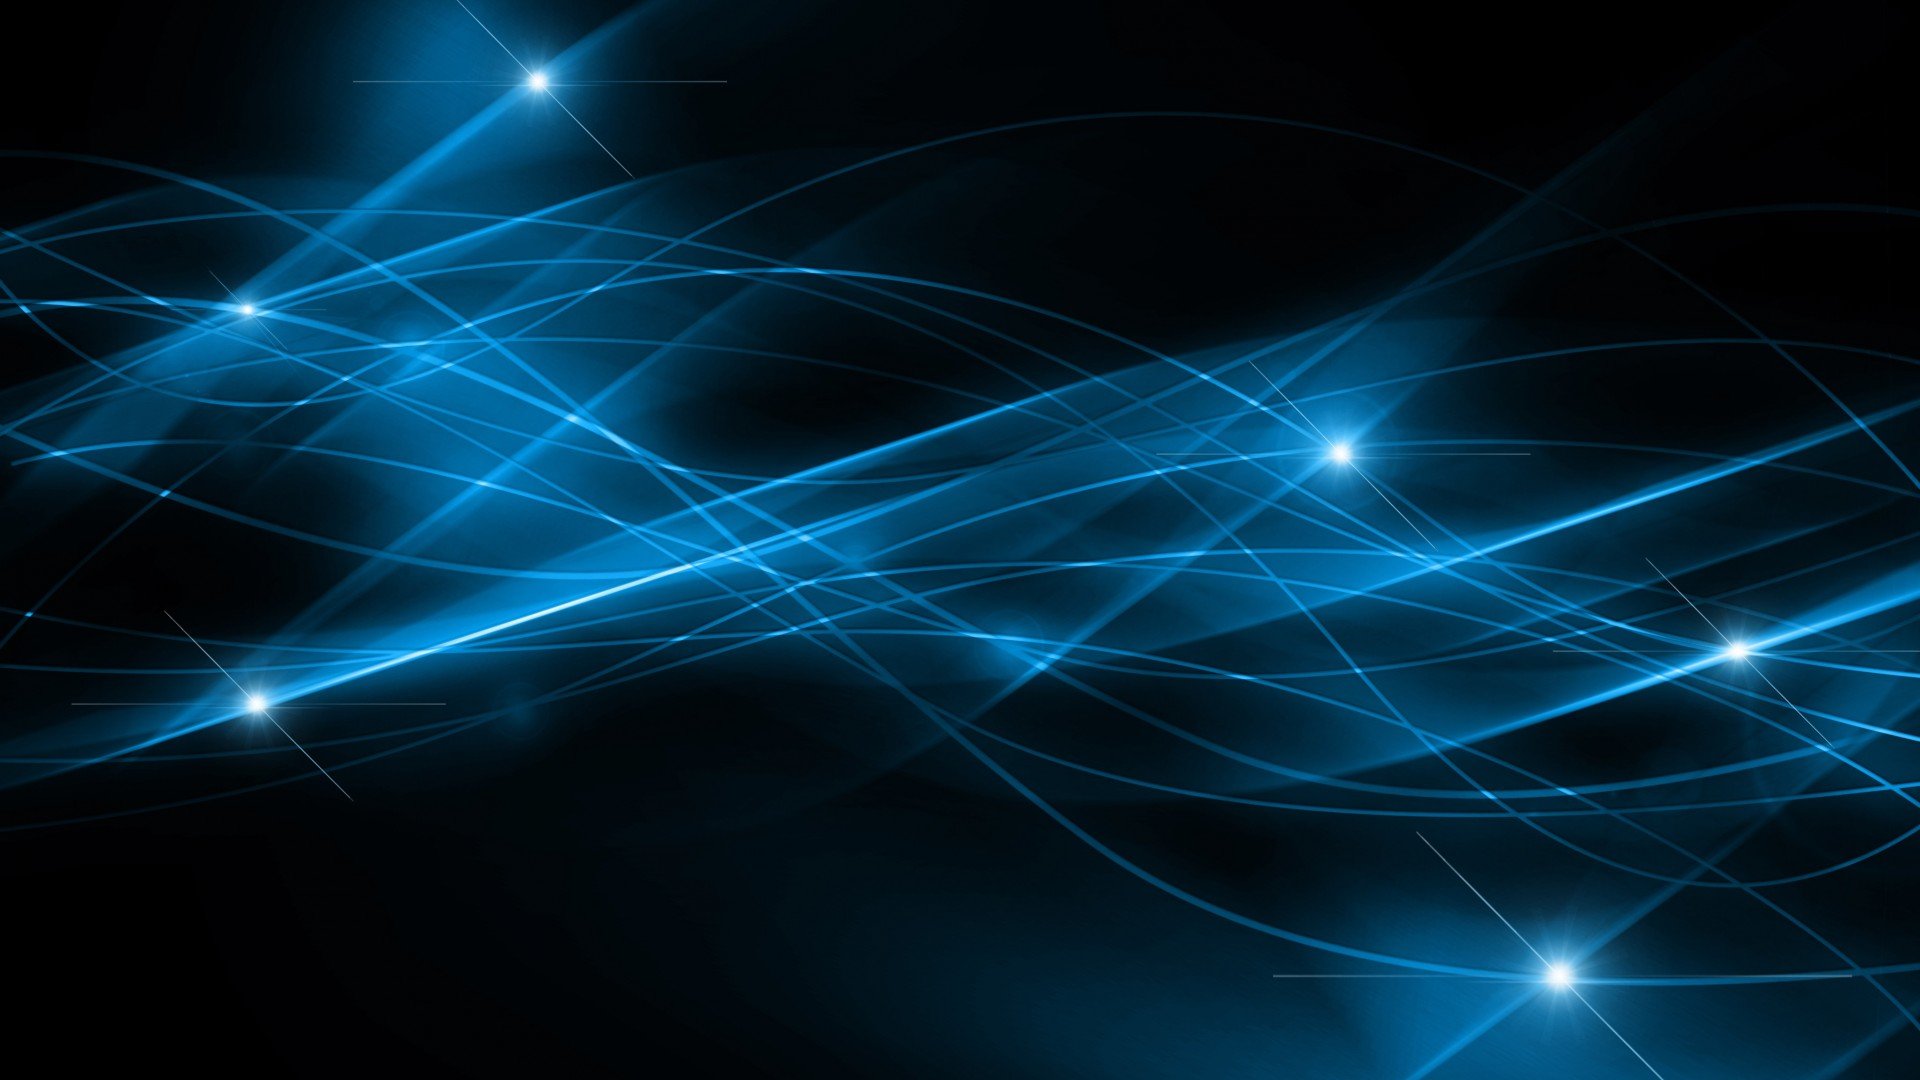 Black And Blue Abstract Backgrounds Hd 1080P 12 HD Wallpapers